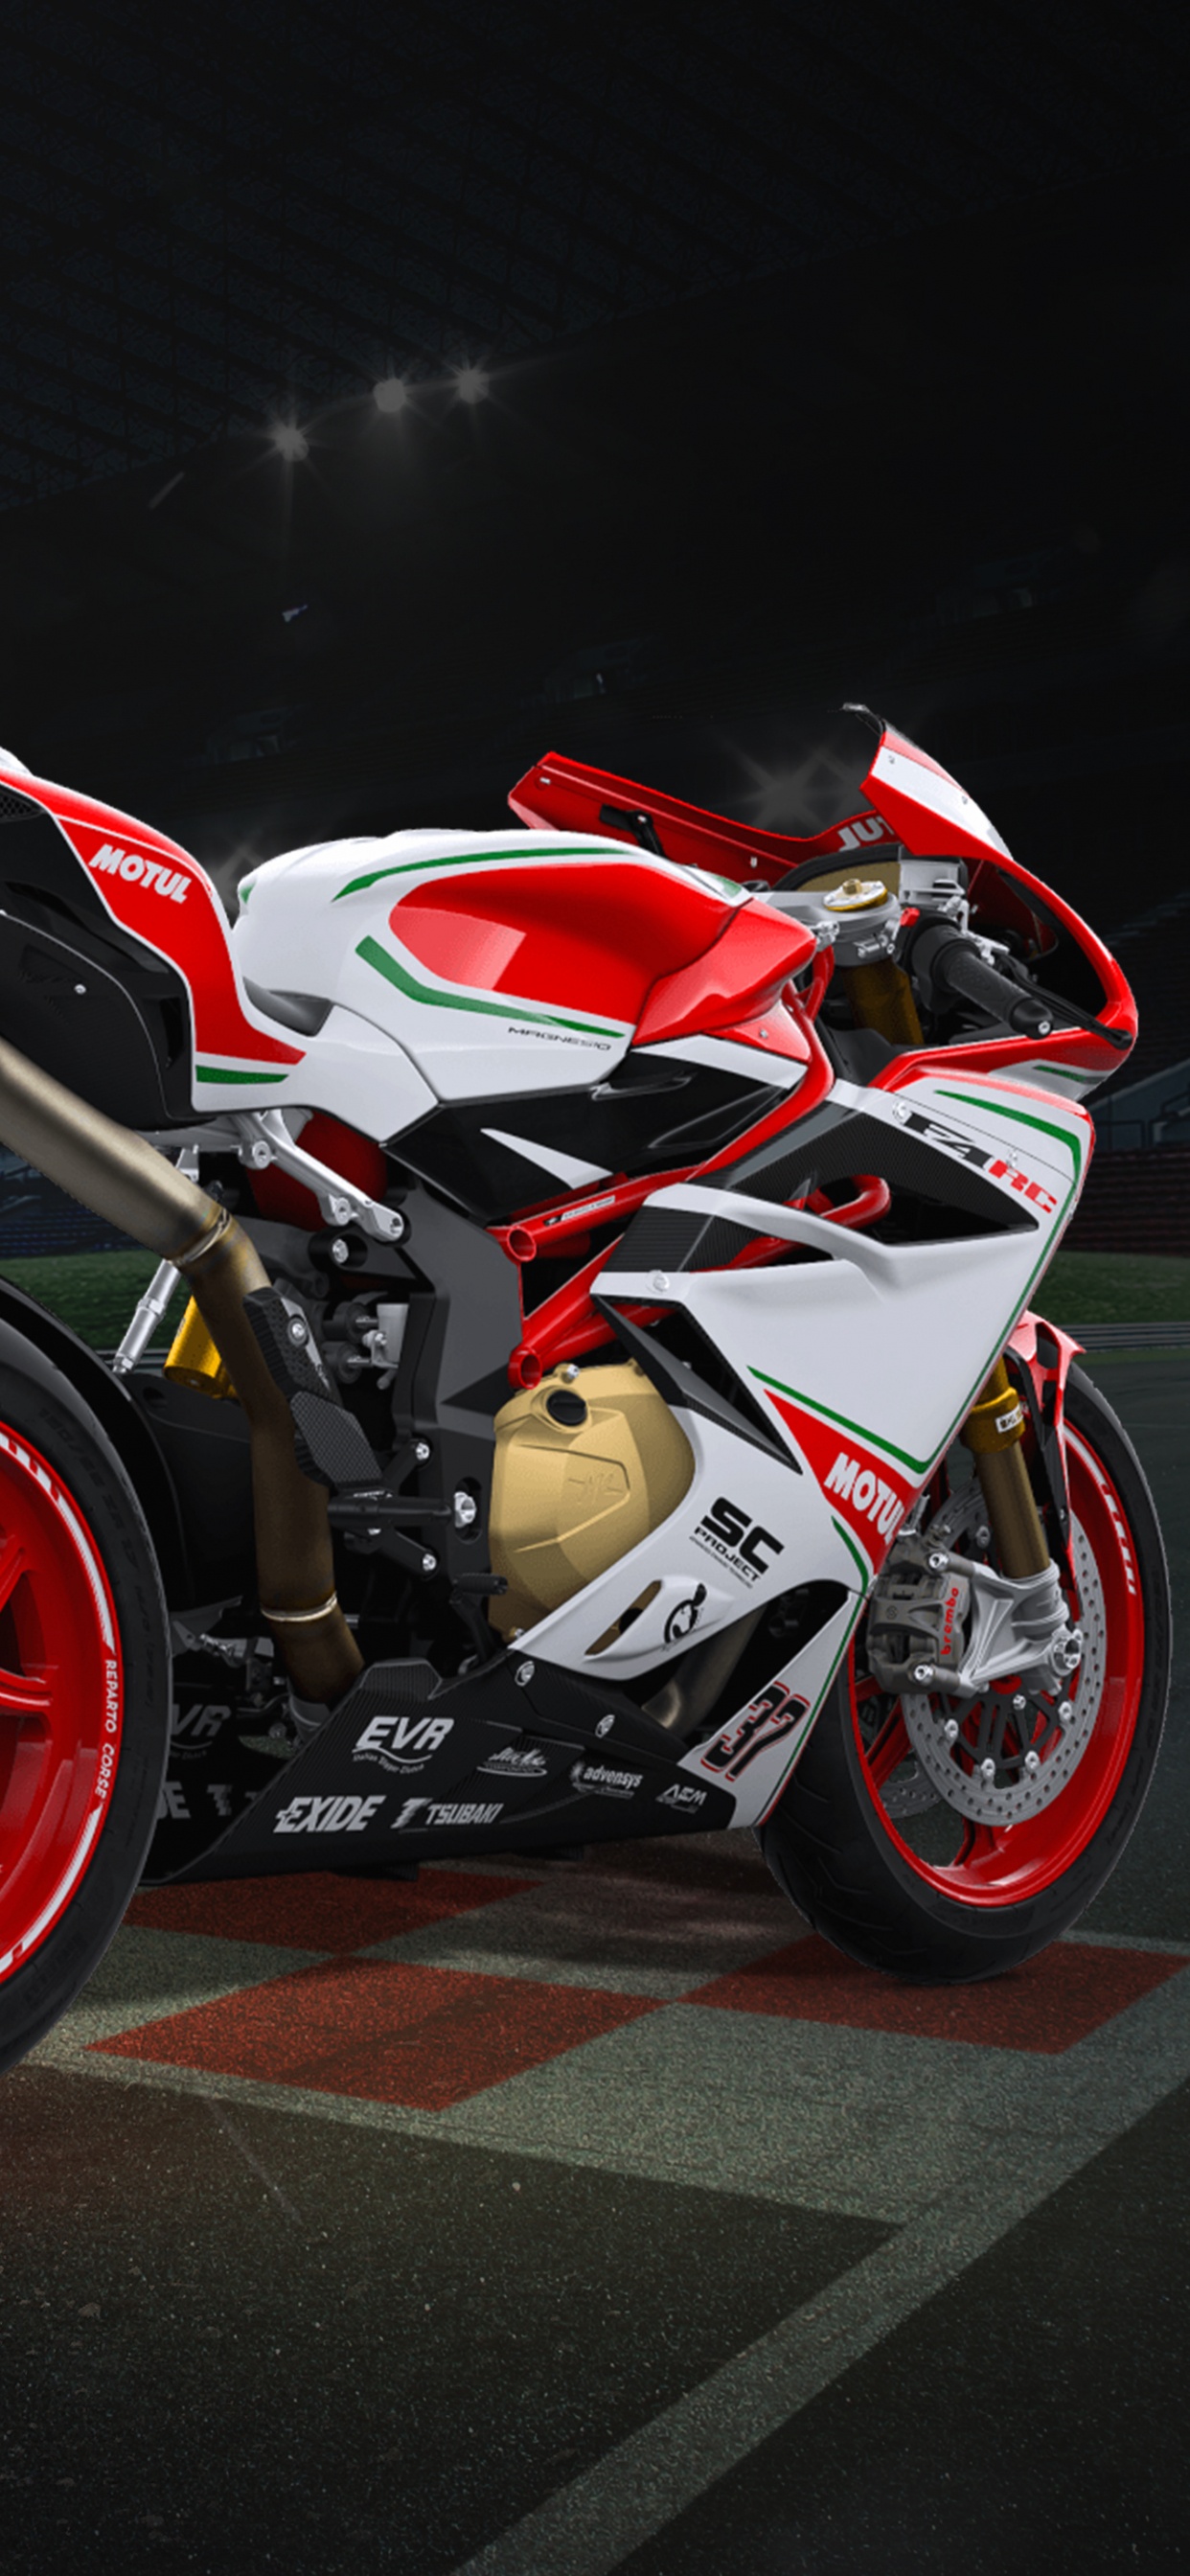 Red and White Sports Bike on Track Field. Wallpaper in 1242x2688 Resolution